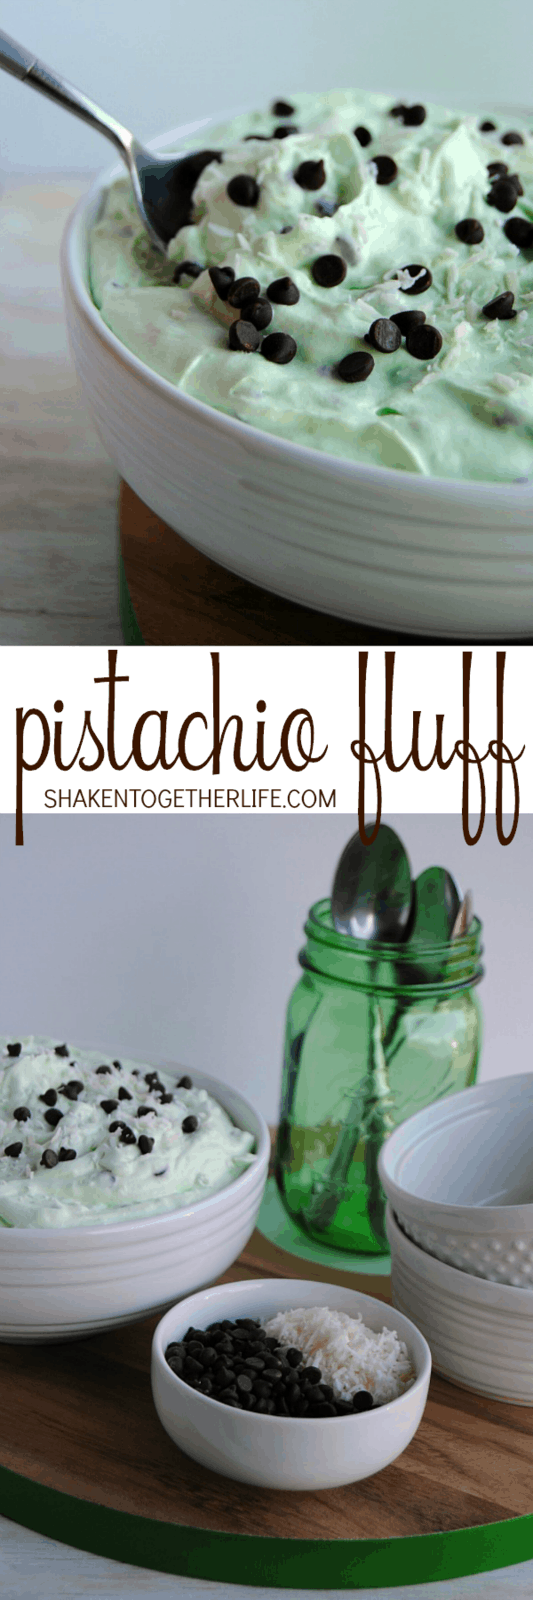 Pistachio fluff is a light dessert that is perfect for Spring! Pistachio flavored fluff is combined with coconut & mini chocolate chips for a no bake treat!